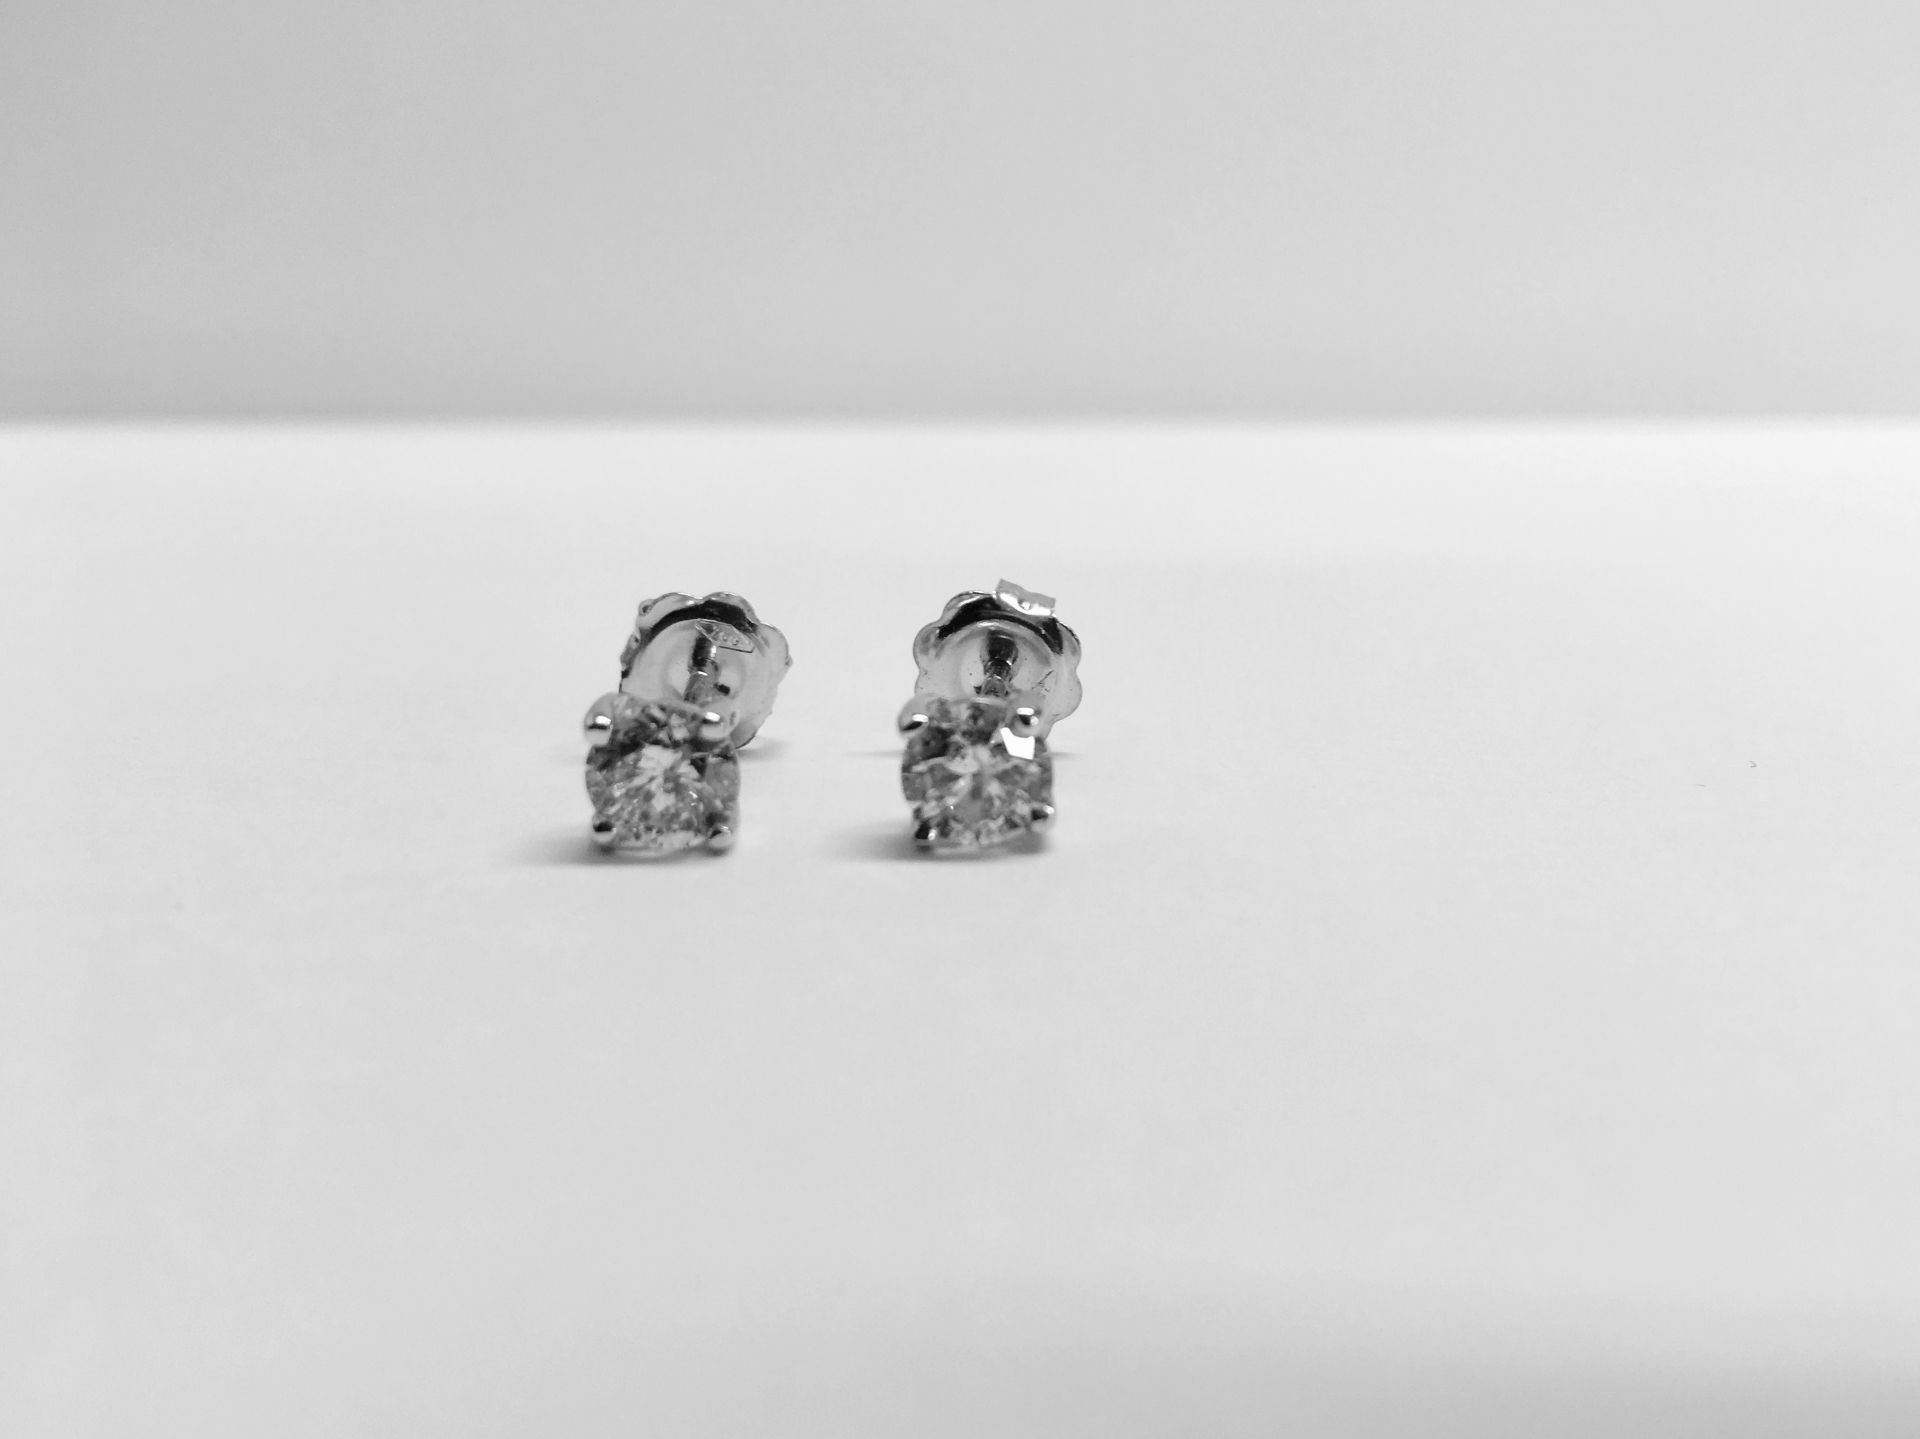 1.50ct diamond solitaire earrings set in 18ct white gold. 2 x brilliant cut diamonds, I colour and - Image 2 of 2